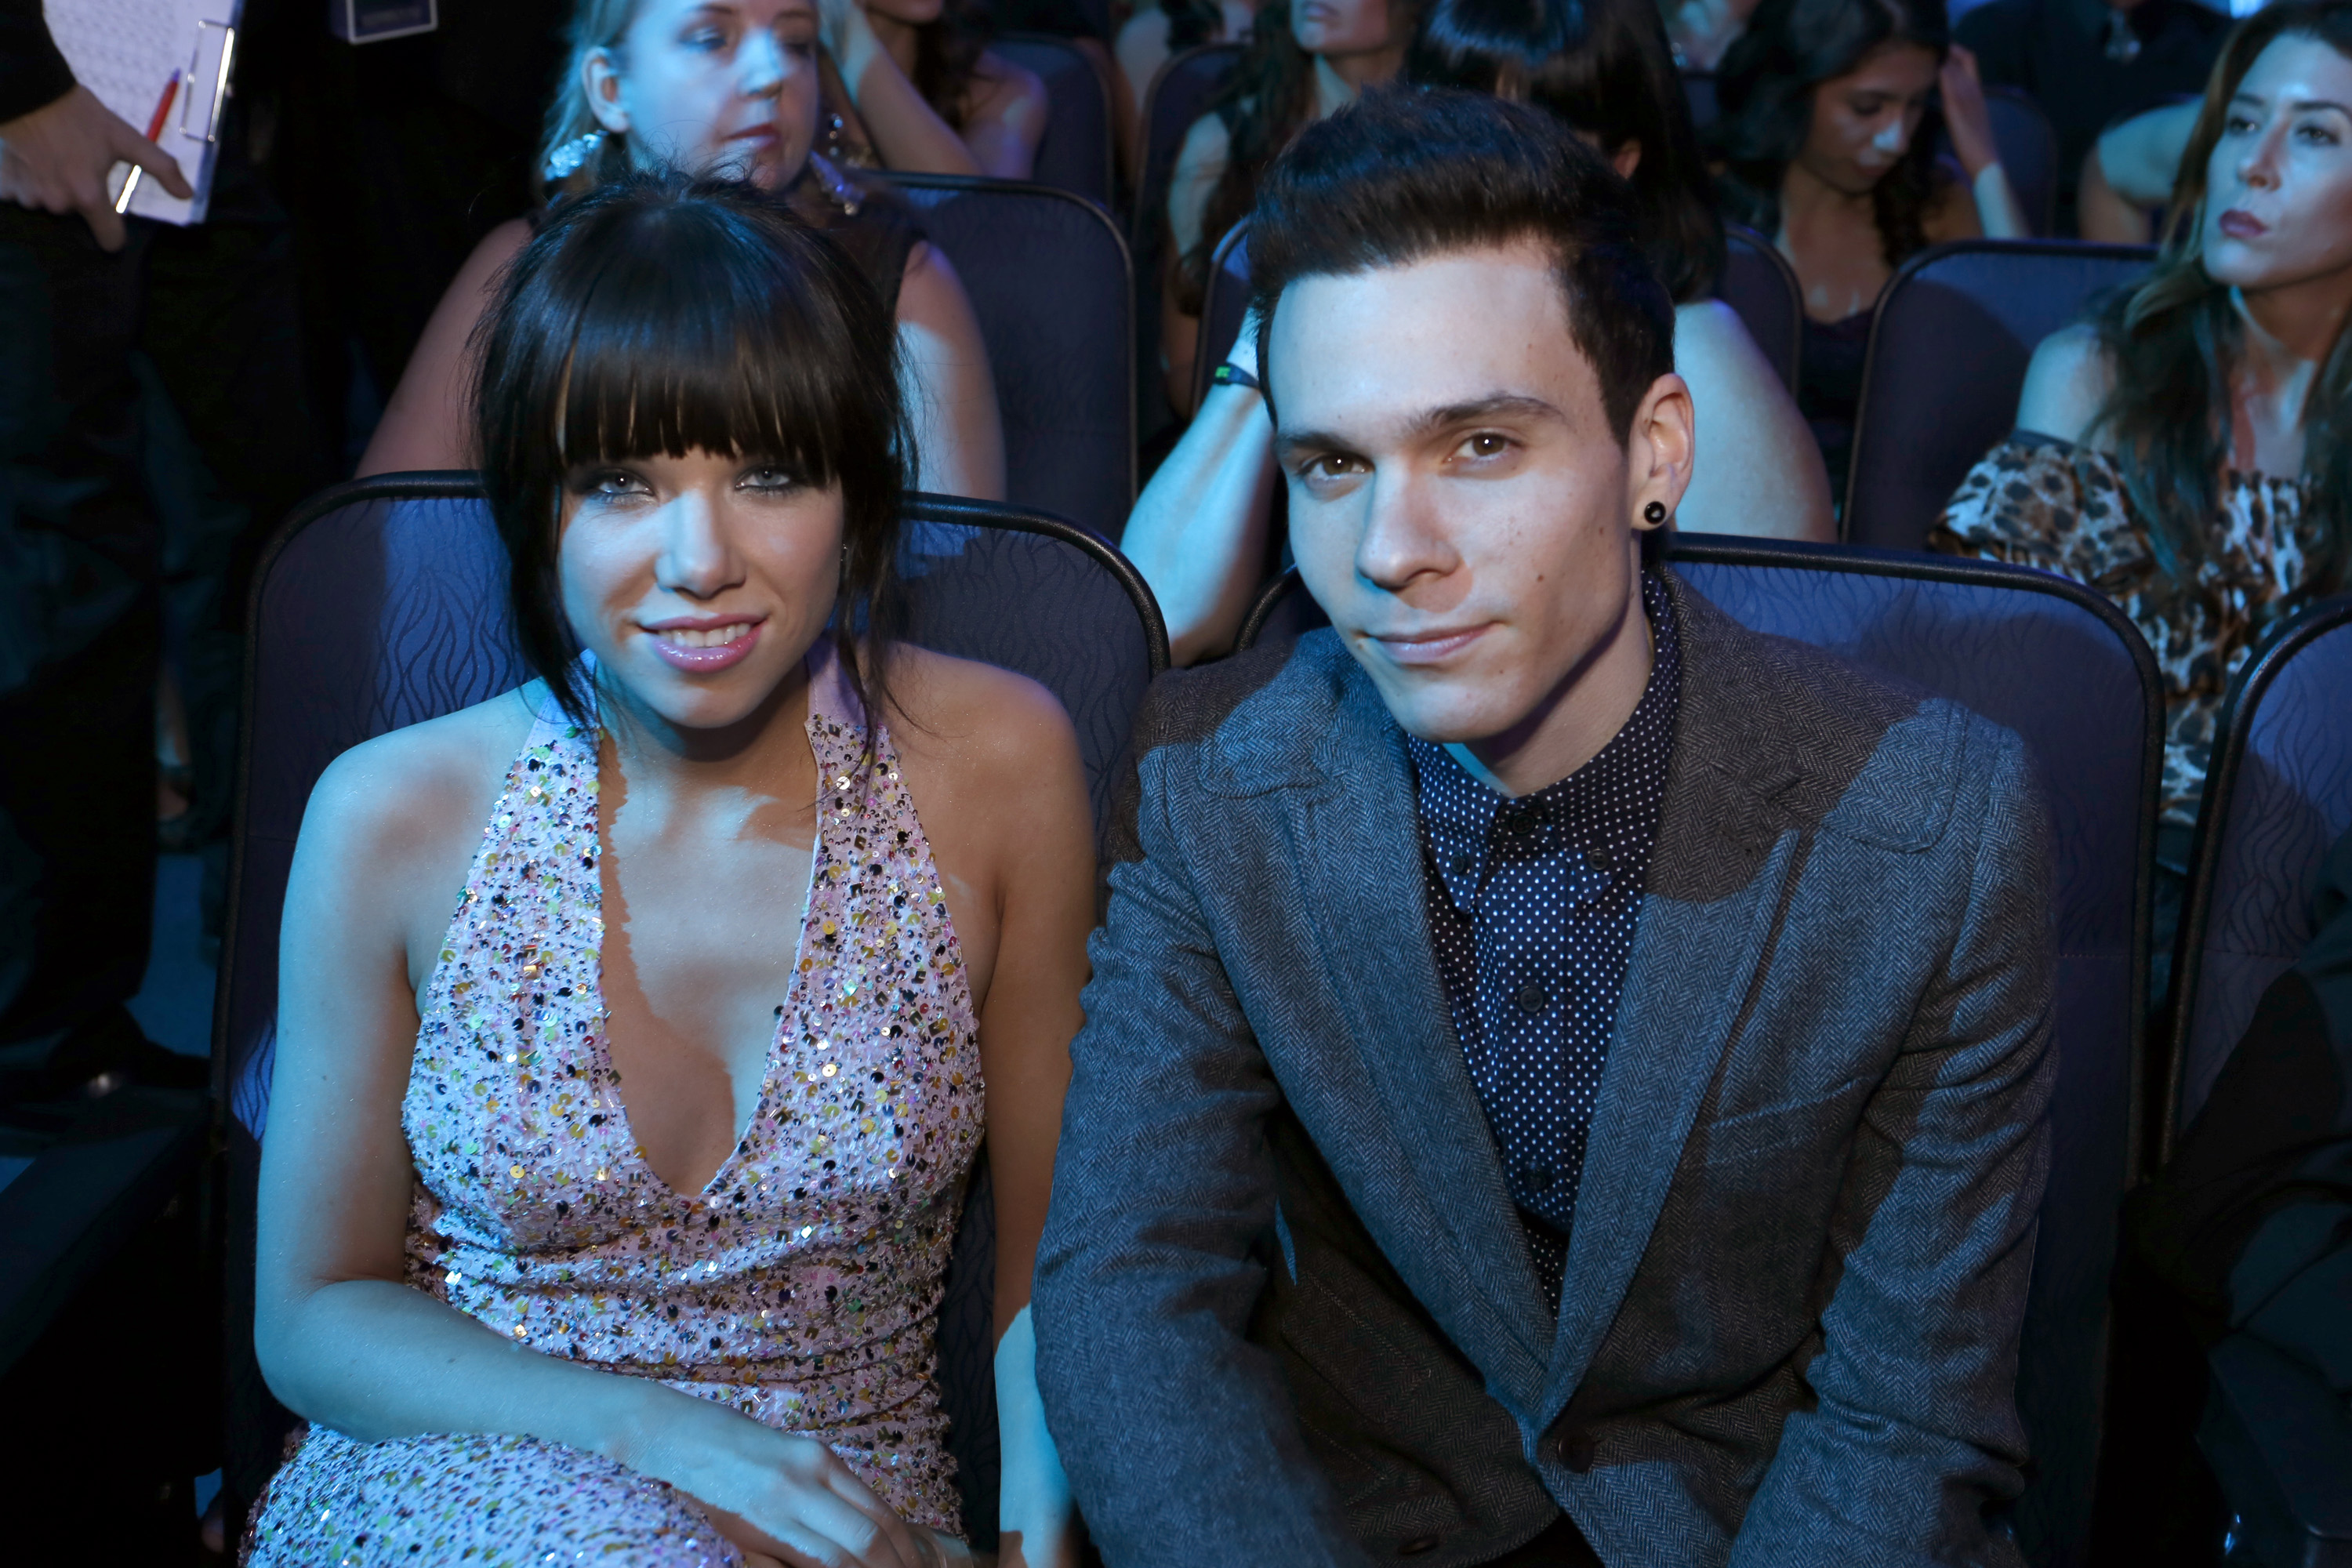 Singer Carly Rae Jepsen and musician Matthew Koma at the 40th American Music Awards held at Nokia Theatre L.A. Live on November 18, 2012 in Los Angeles, California. | Source: Getty Images